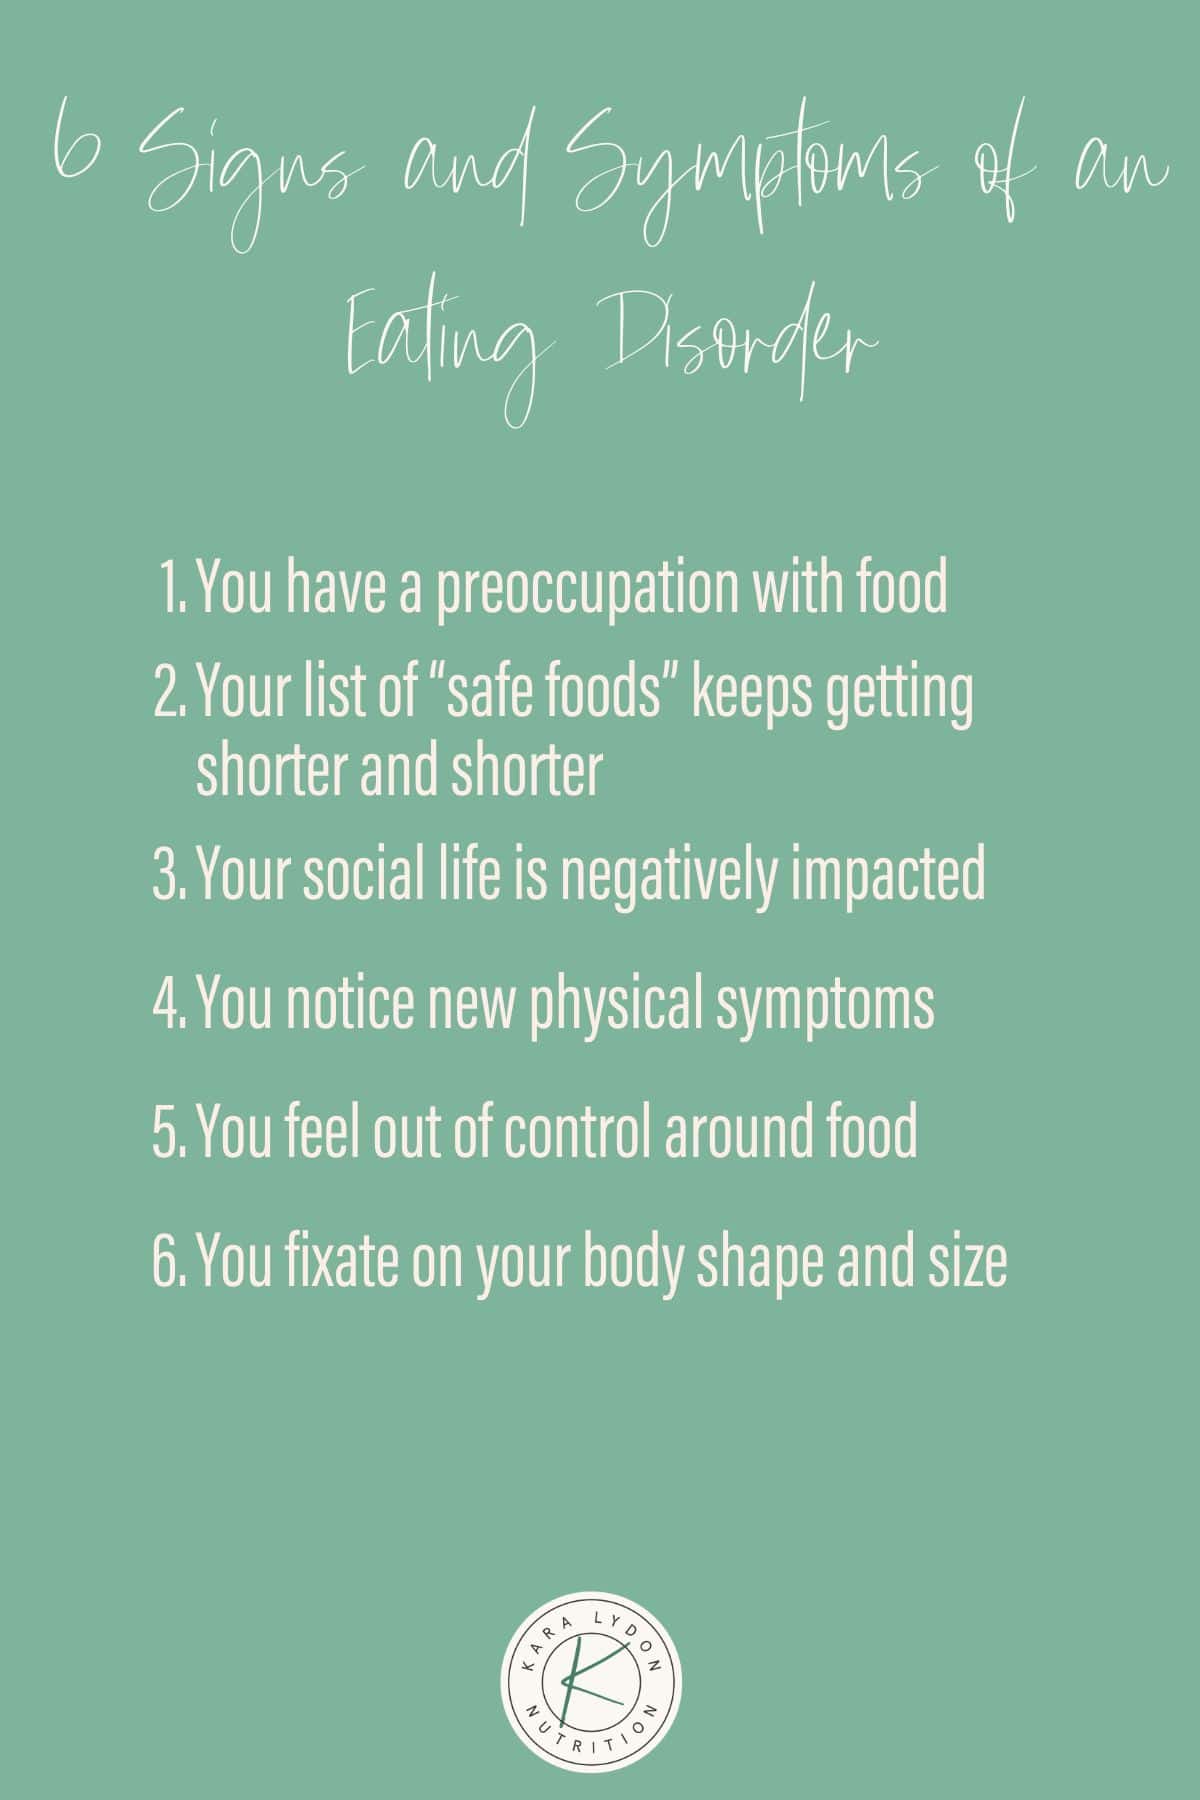 Graphic listing 6 signs and symptoms of an eating disorder.